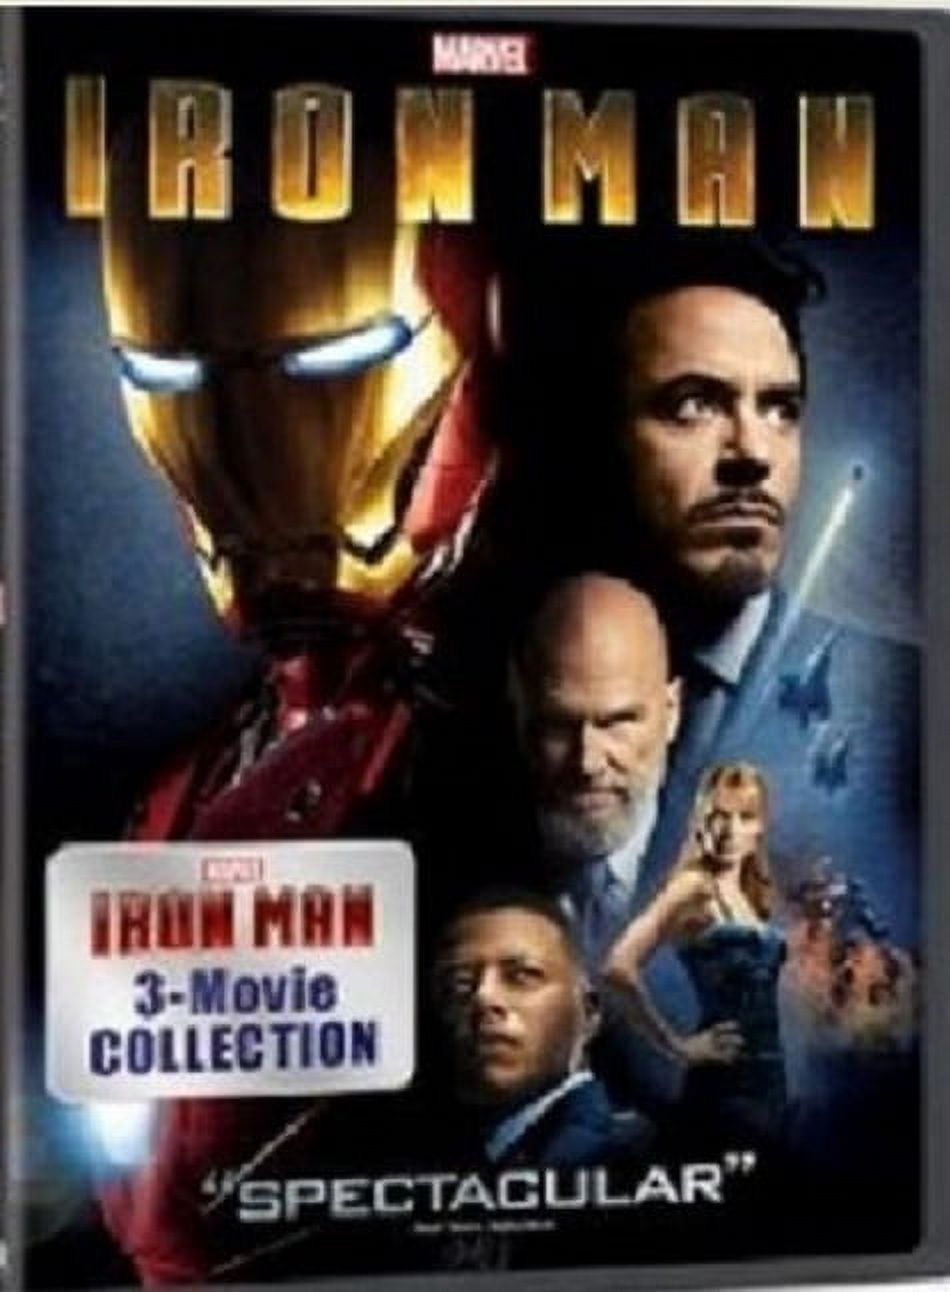 Iron Man 3-Movie Collection (DVD) - image 2 of 2